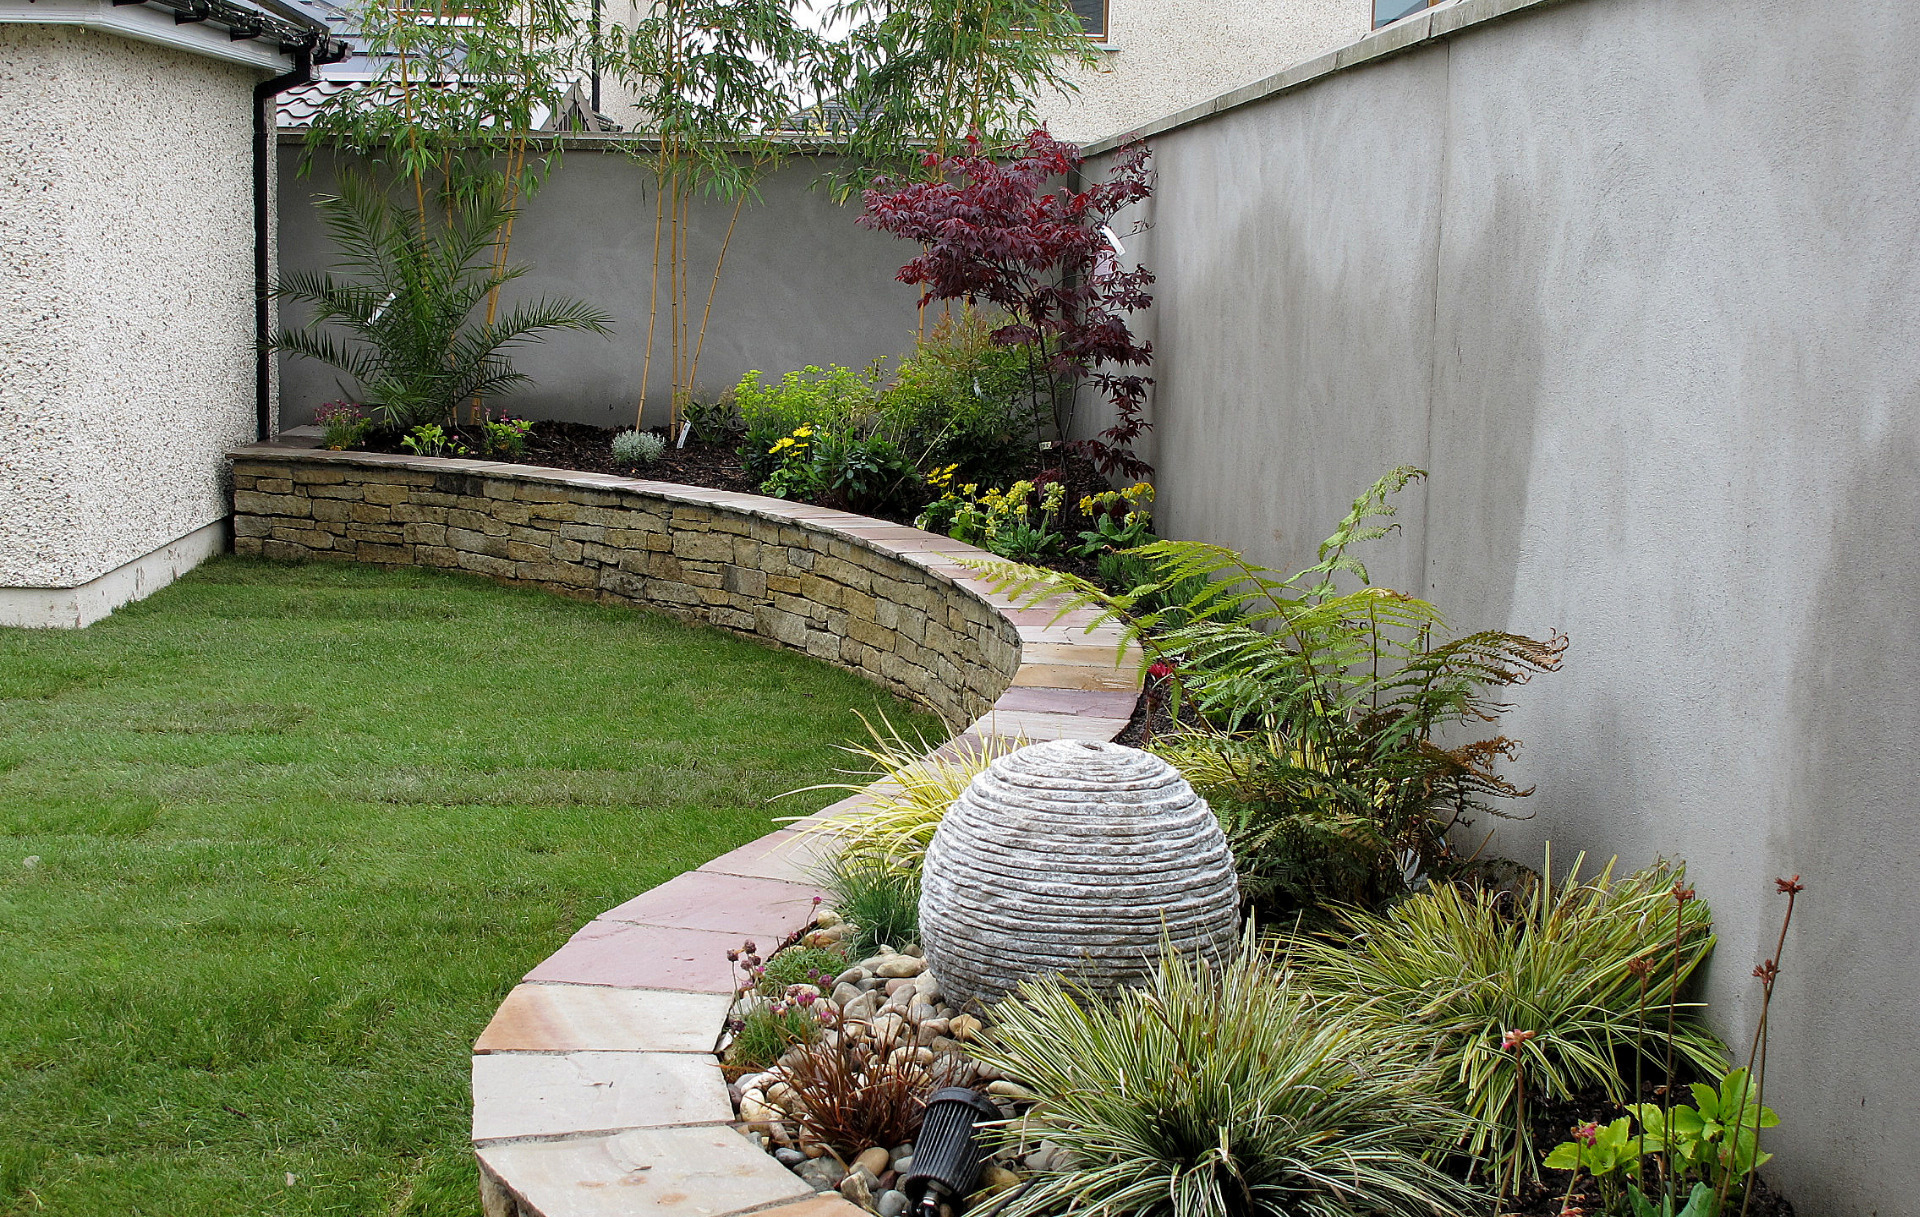 A sweeping Raised Planting Bed in natural stone | functional garden features